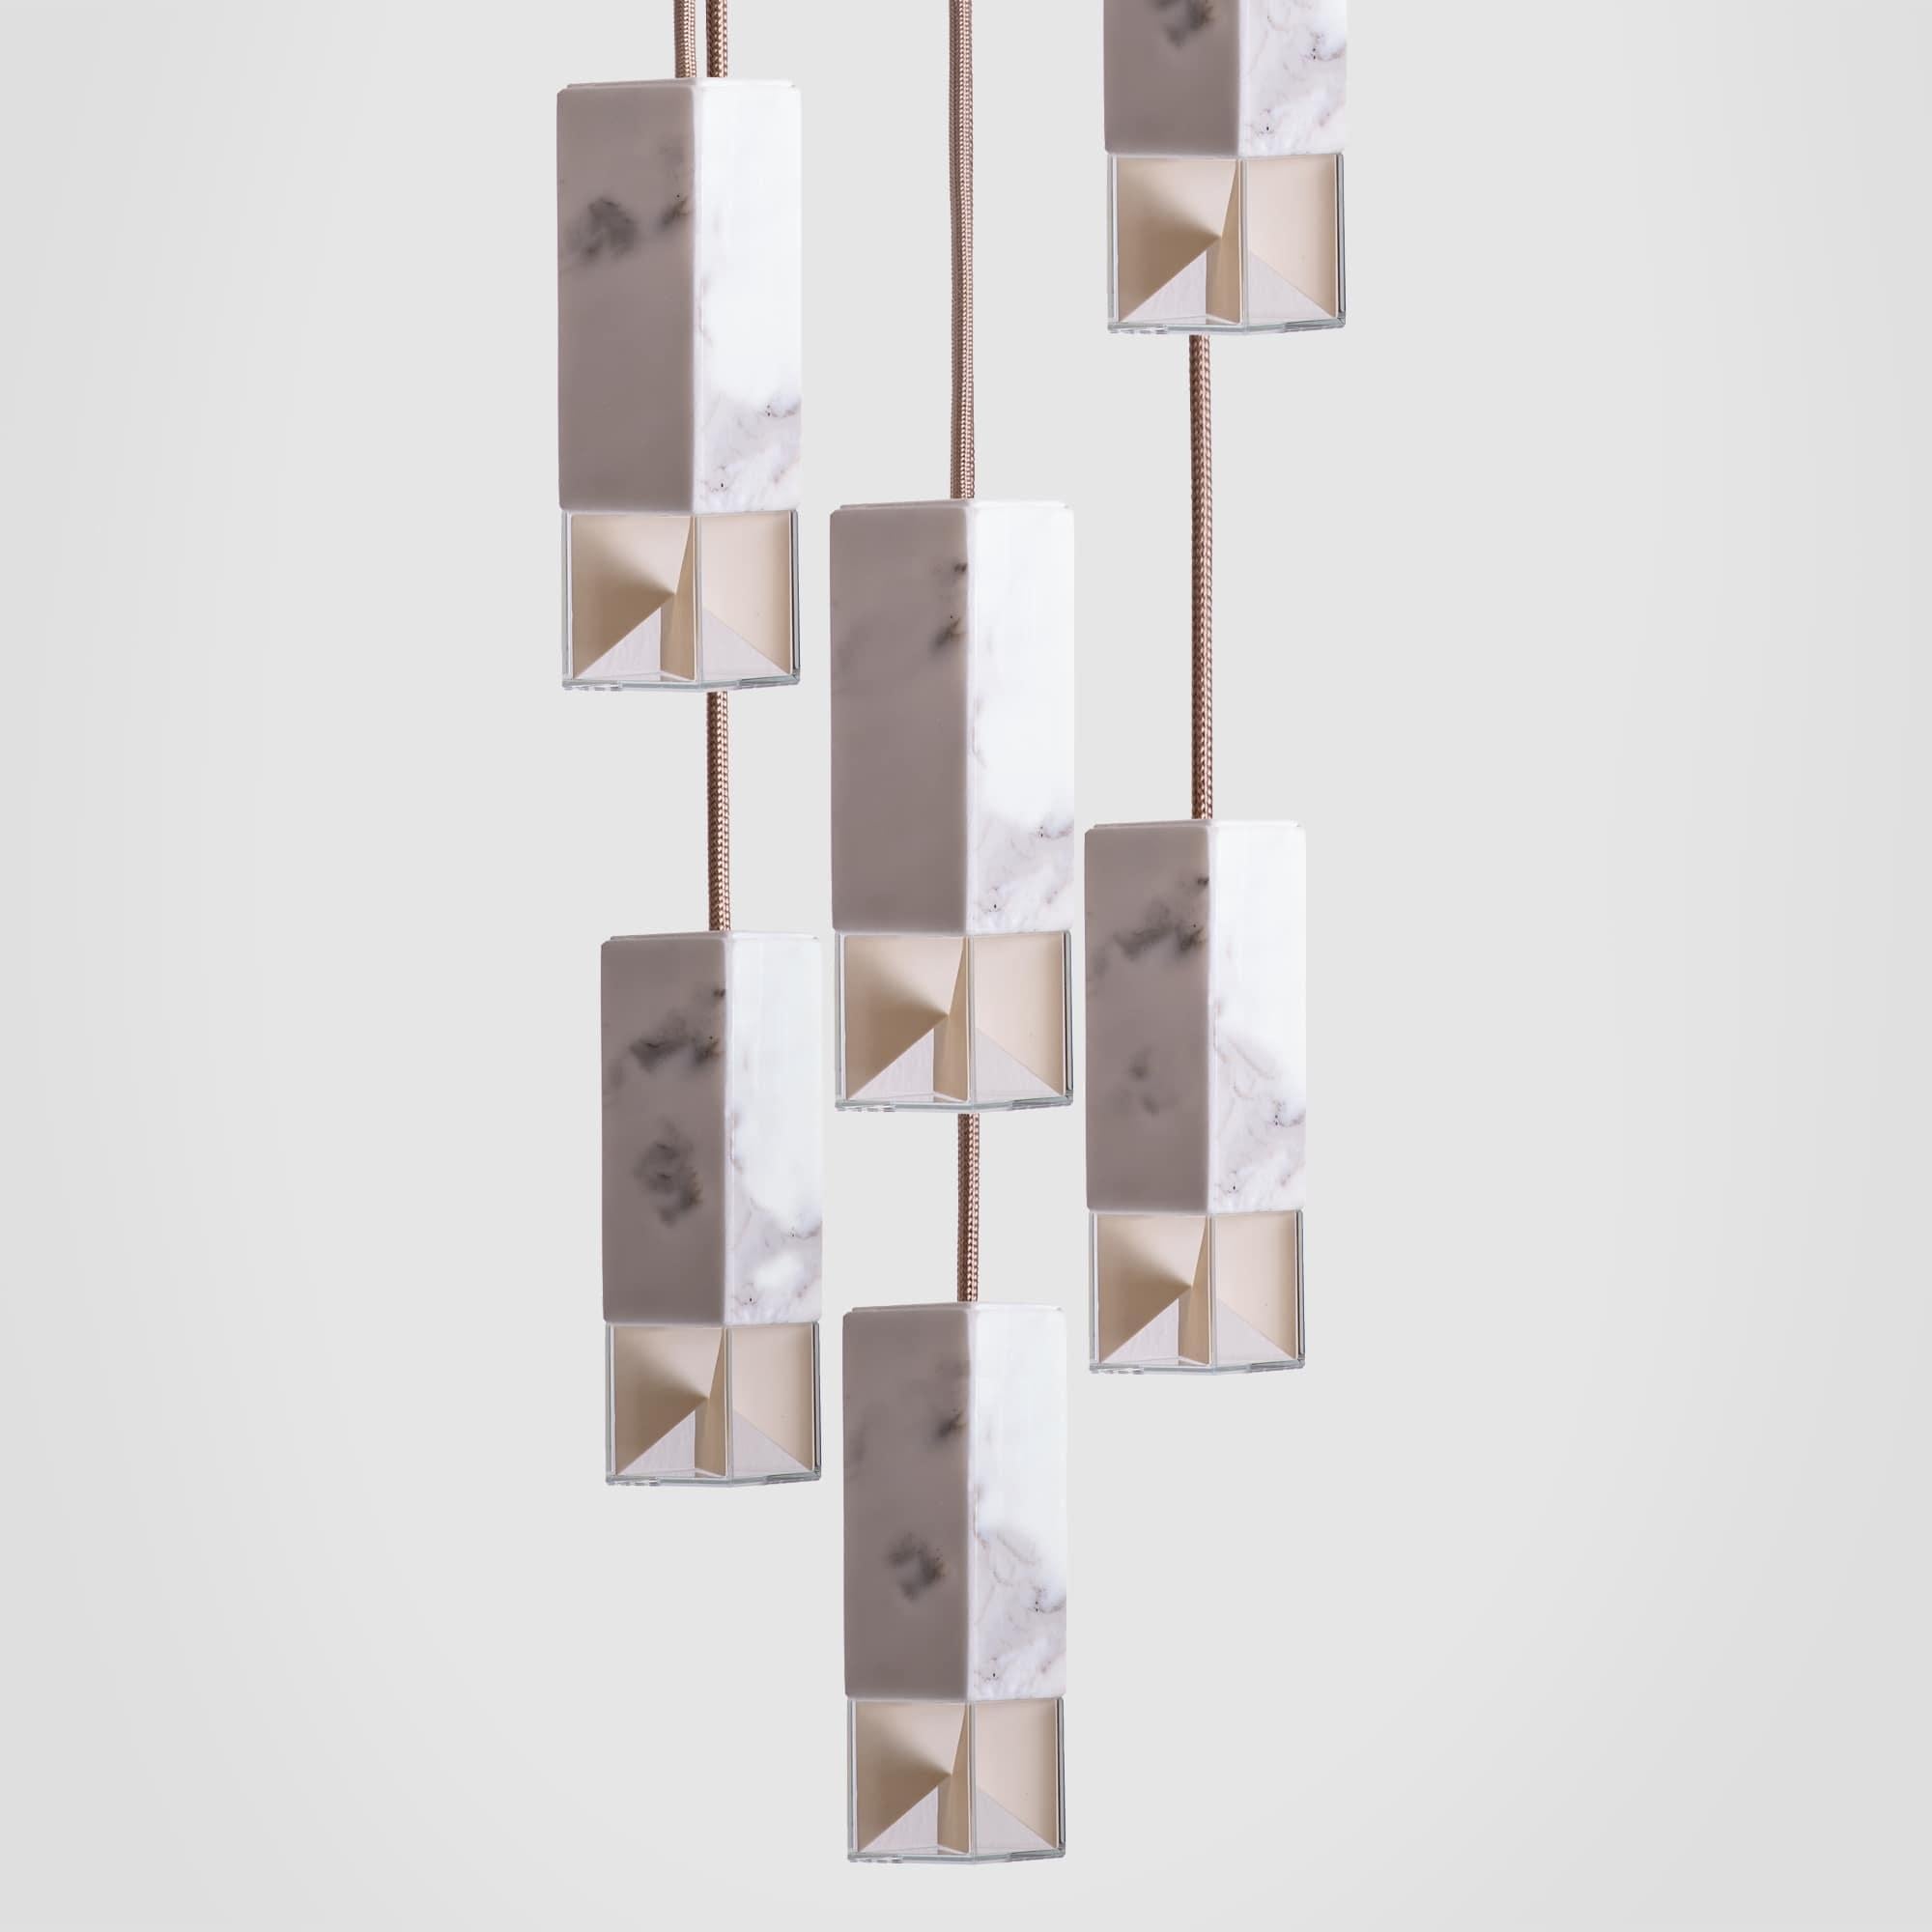 Italian Lamp One 6-Light Chandelier in Marble by Formaminima